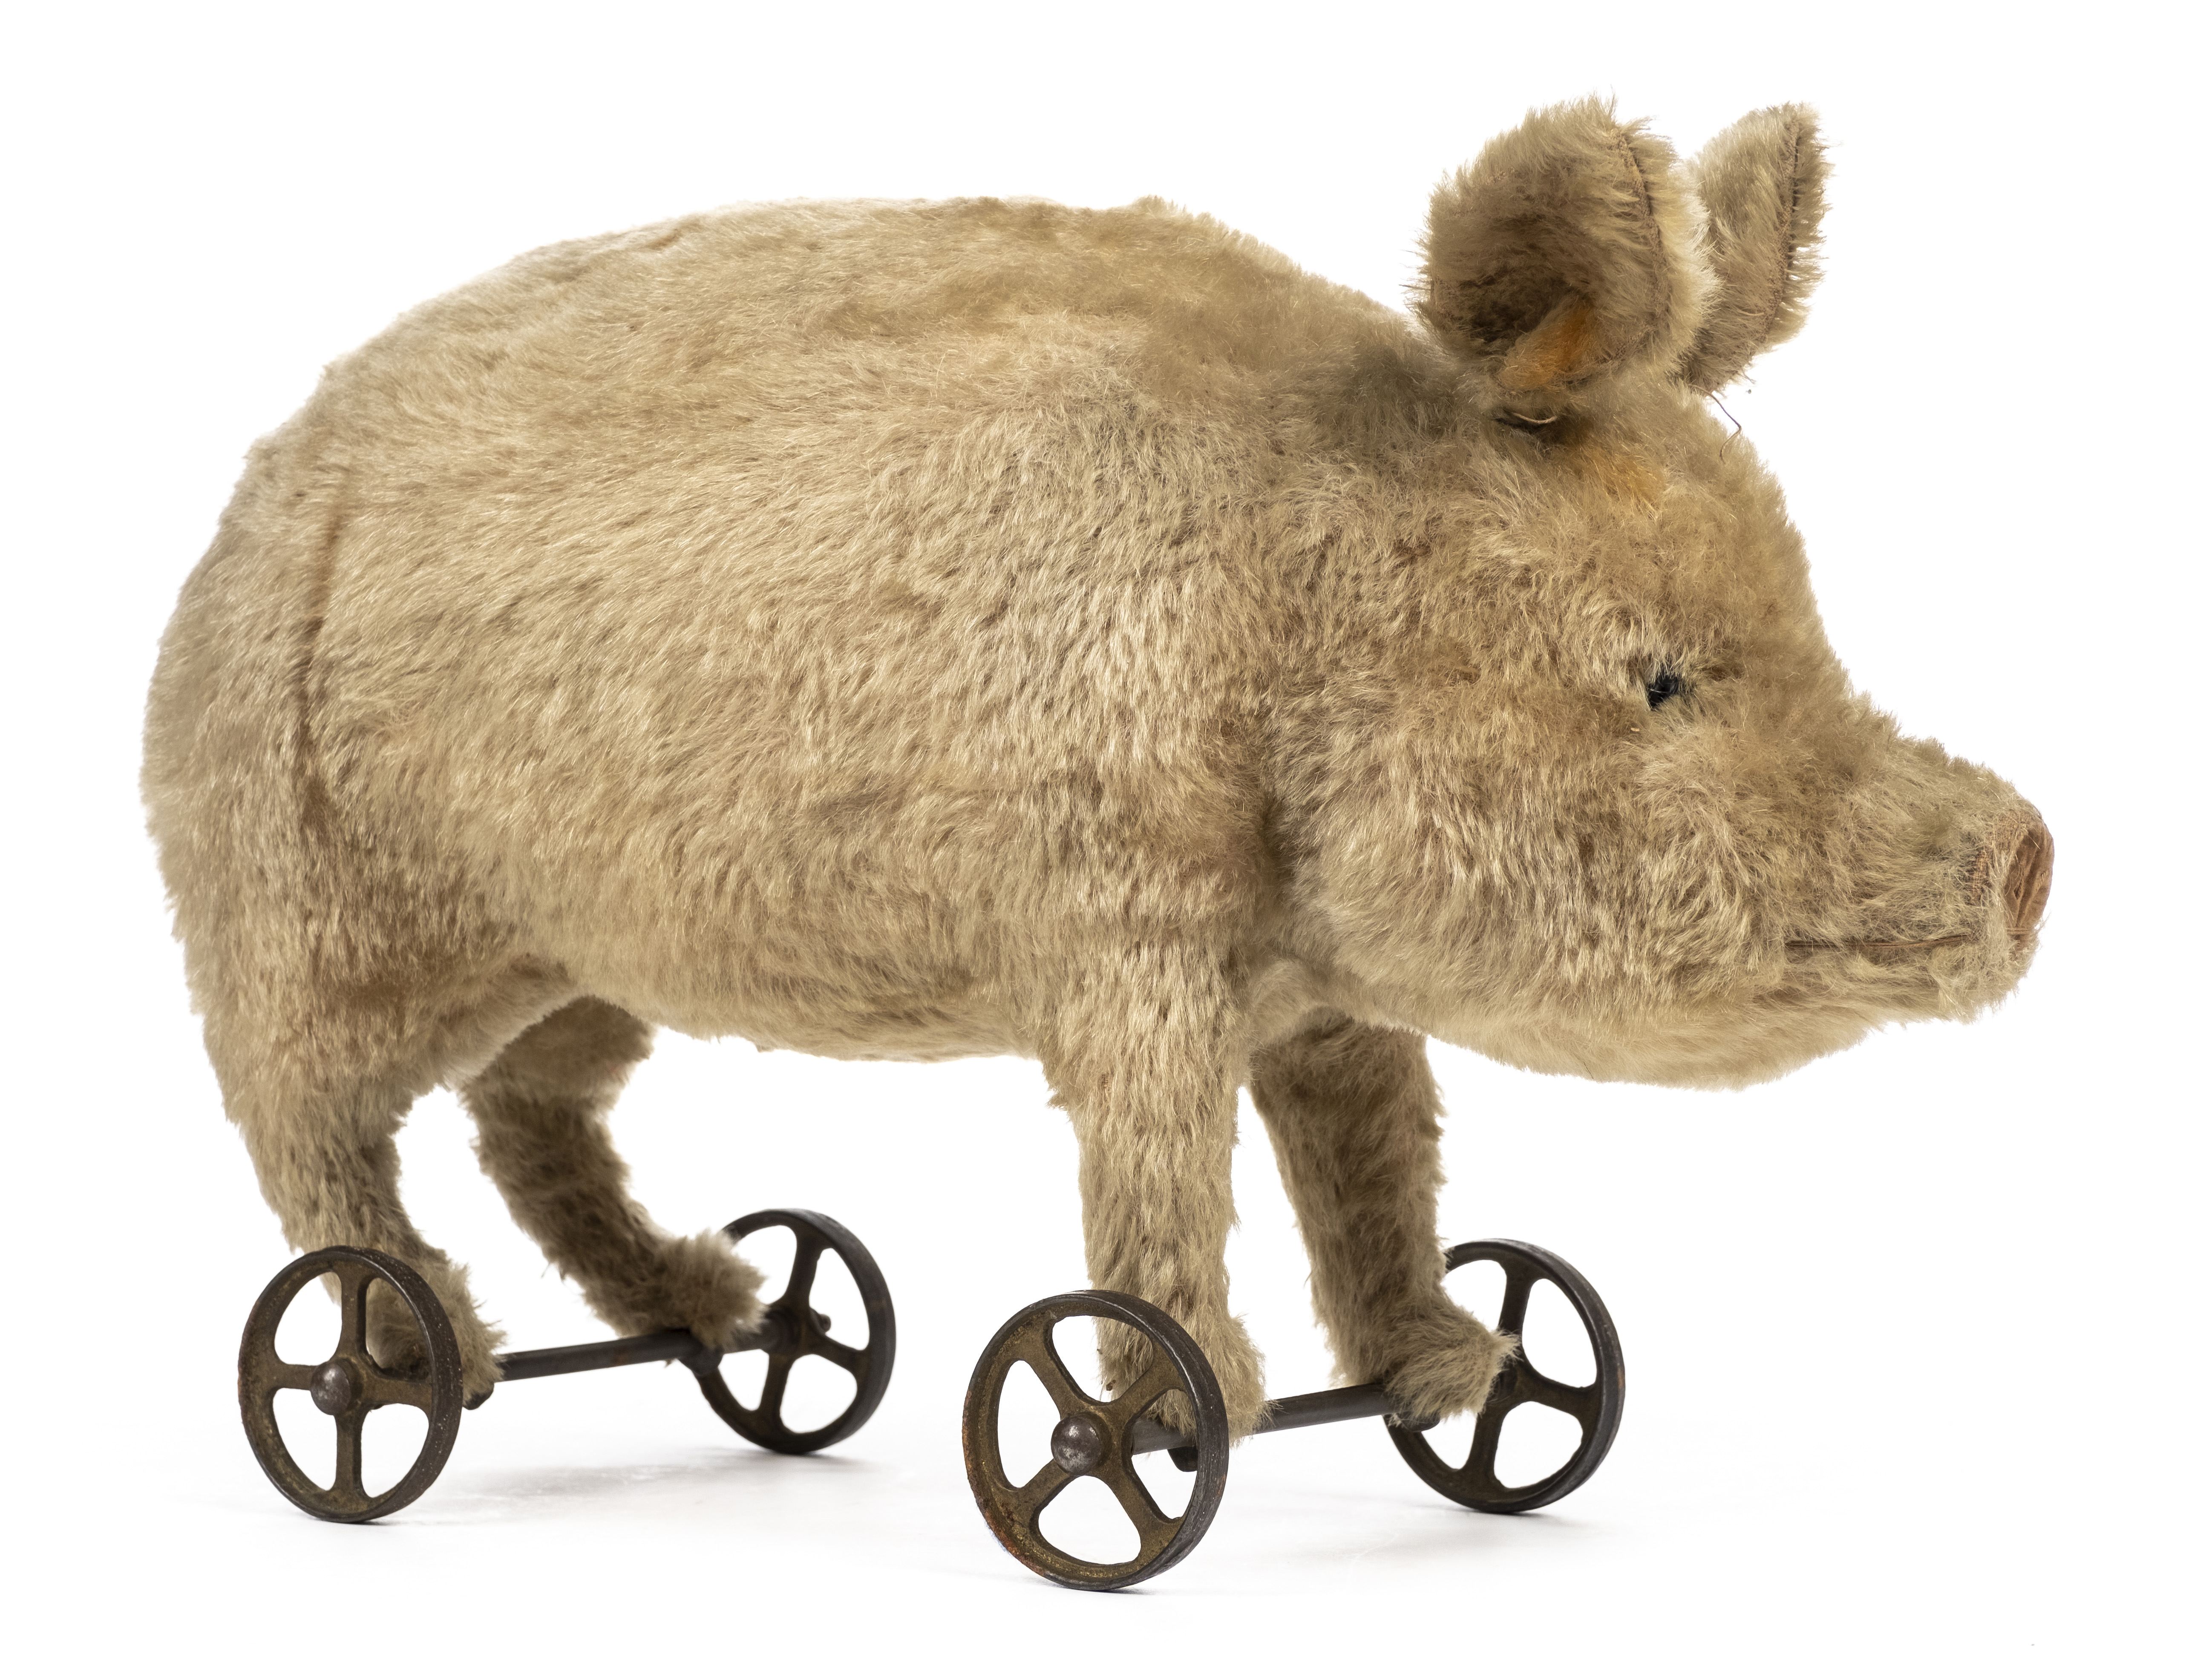 The pig on wheels toy (Dominic Winter Auctioneers/PA).